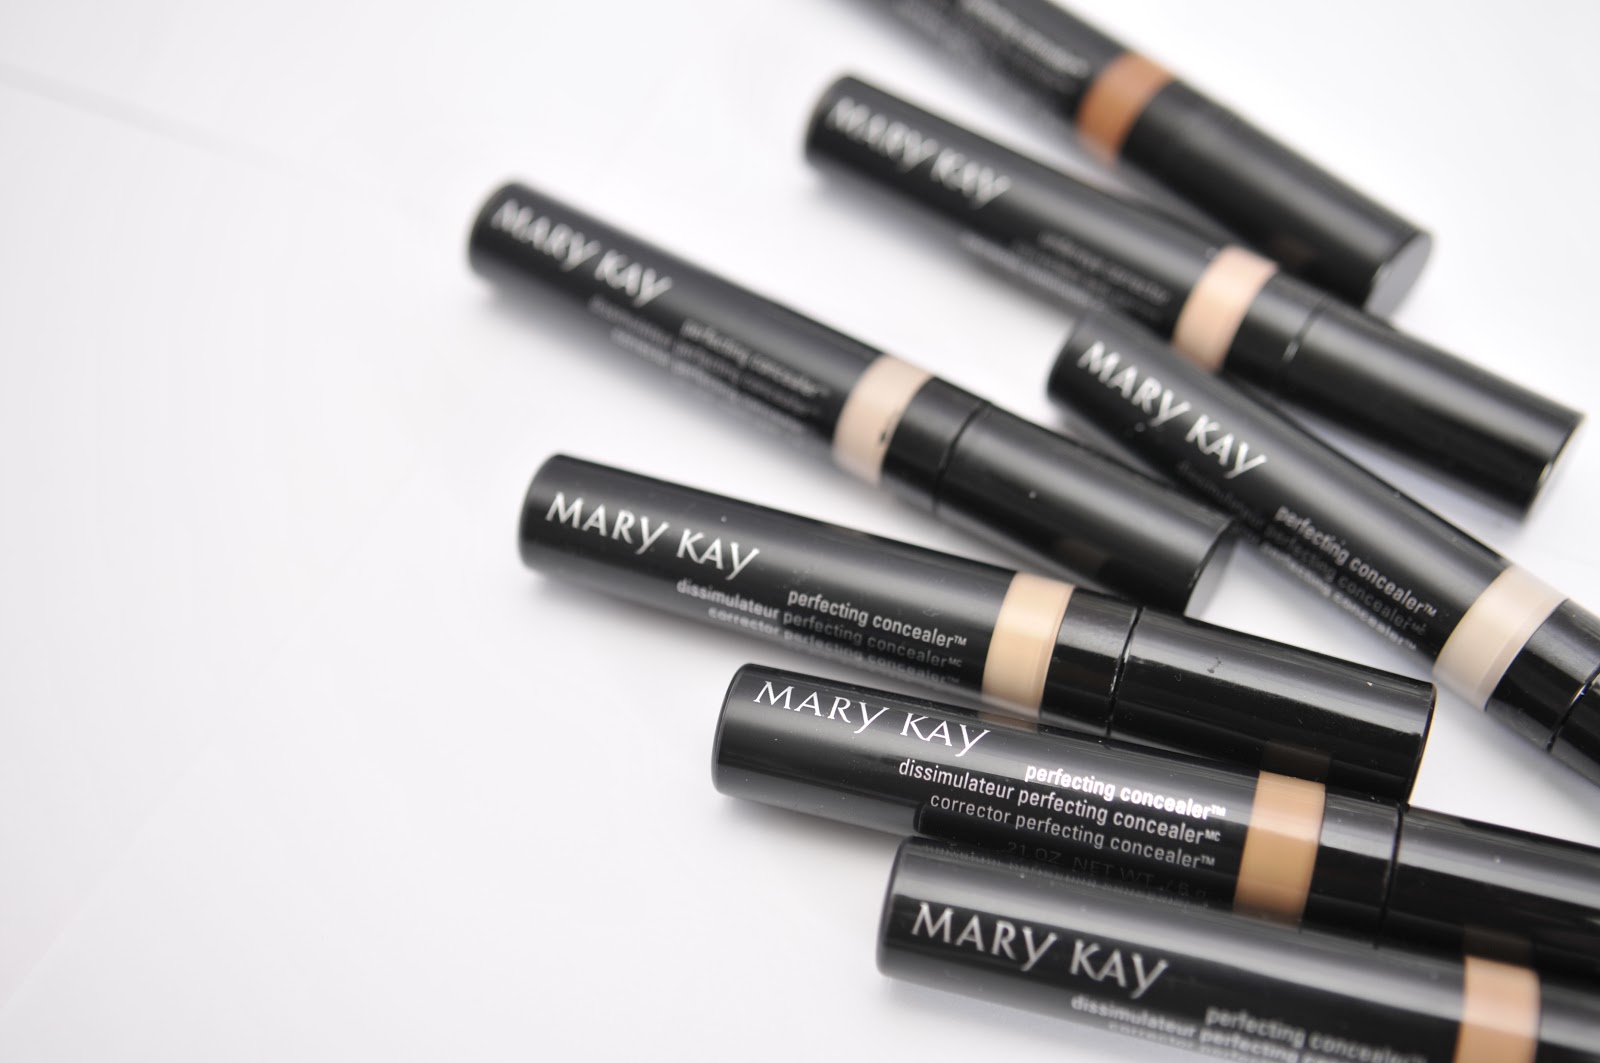 Mary Perfecting Concealer Color Chart